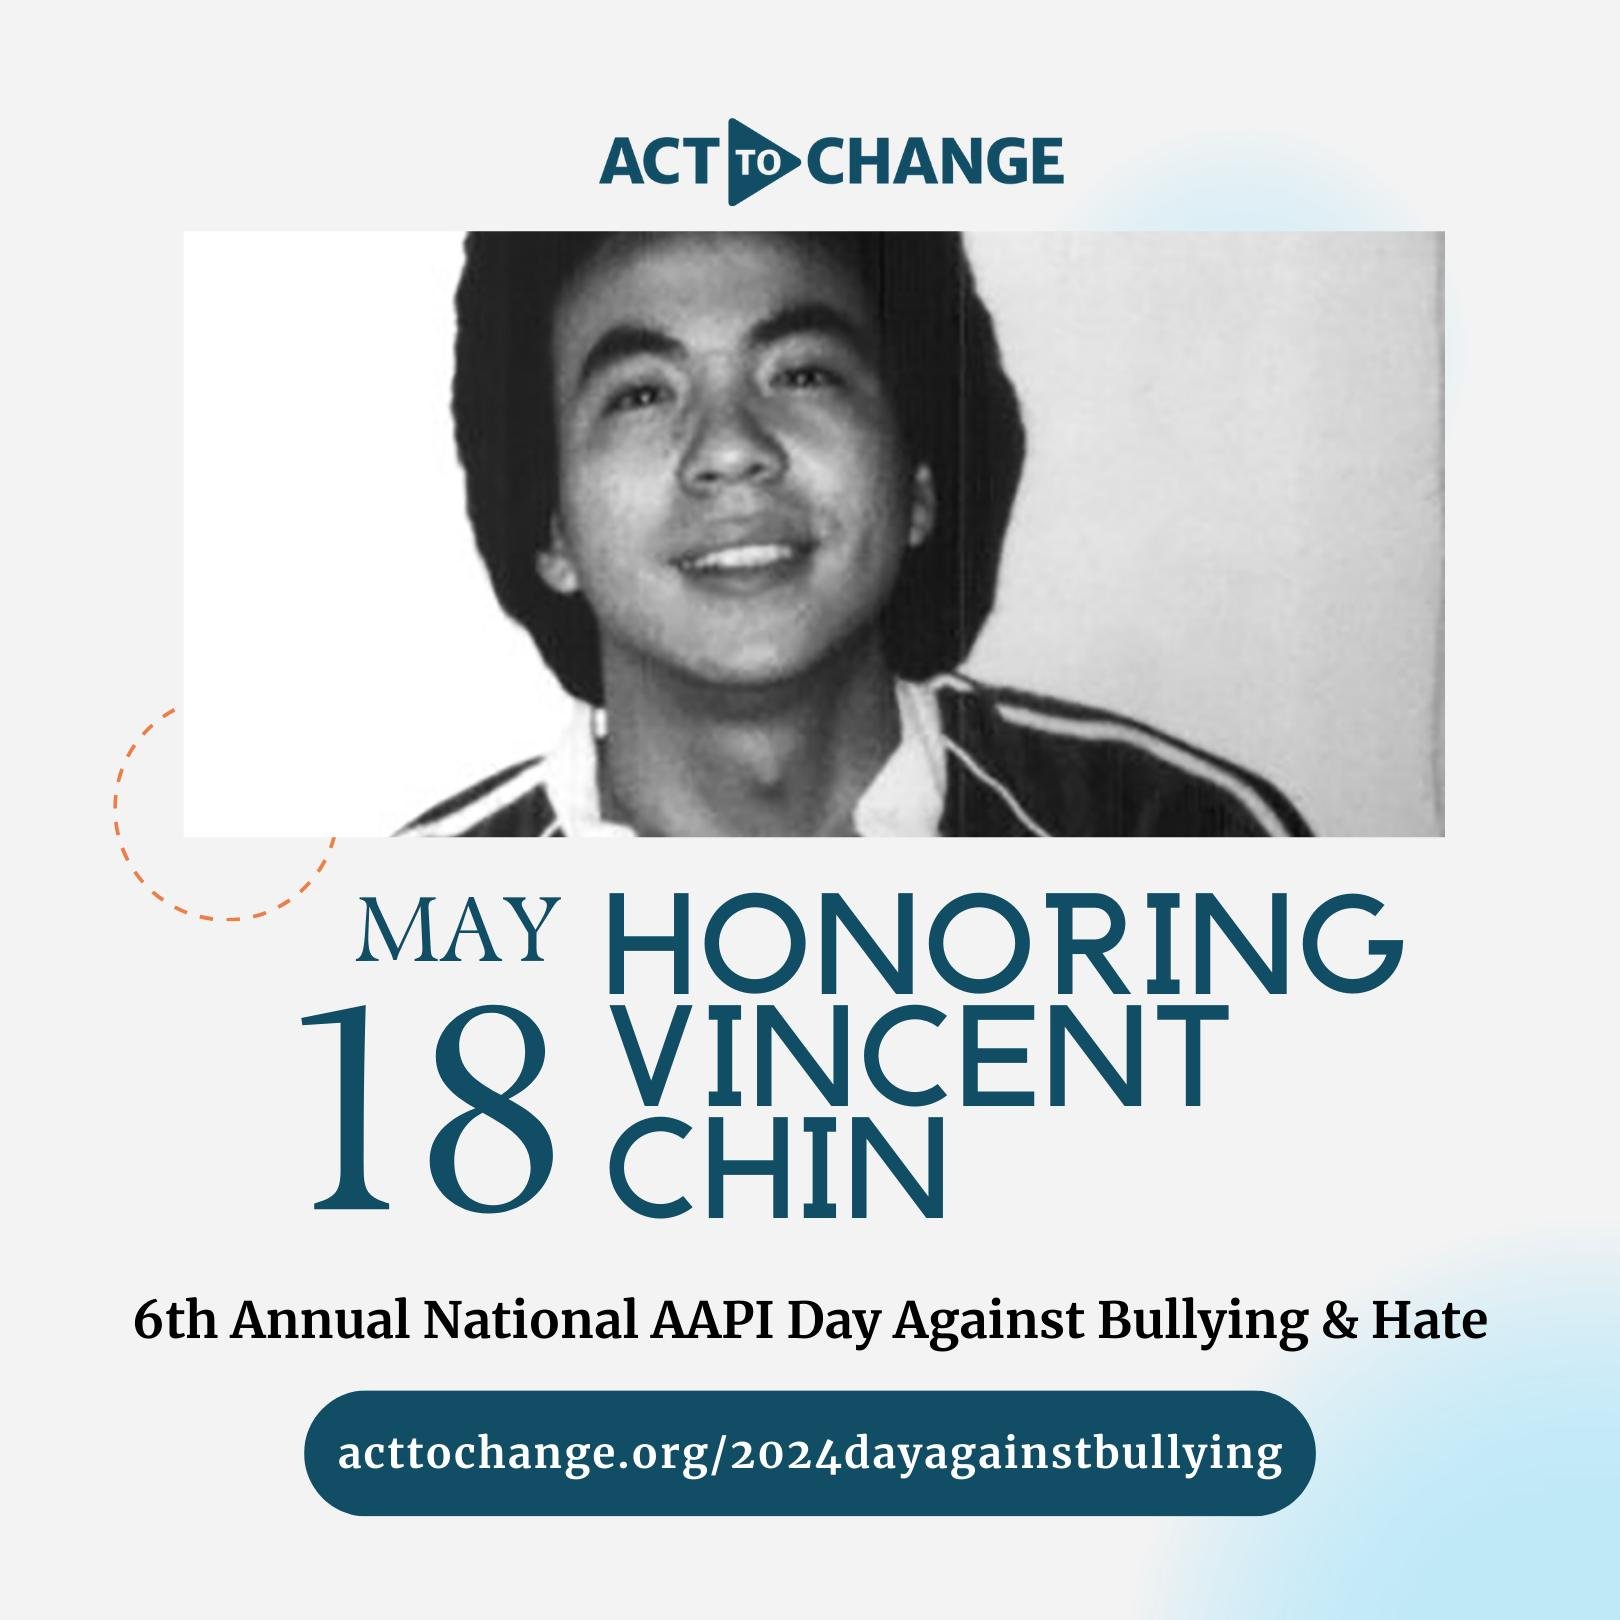 We're proud to stand in solidarity with @acttochange, 40+ jurisdictions, and 70+ organizations in proclaiming May 18 as AAPI Day Against Bullying and Hate in honor of Vincent Chin.

Join us and raise your voice to take a stand against bullying and ha